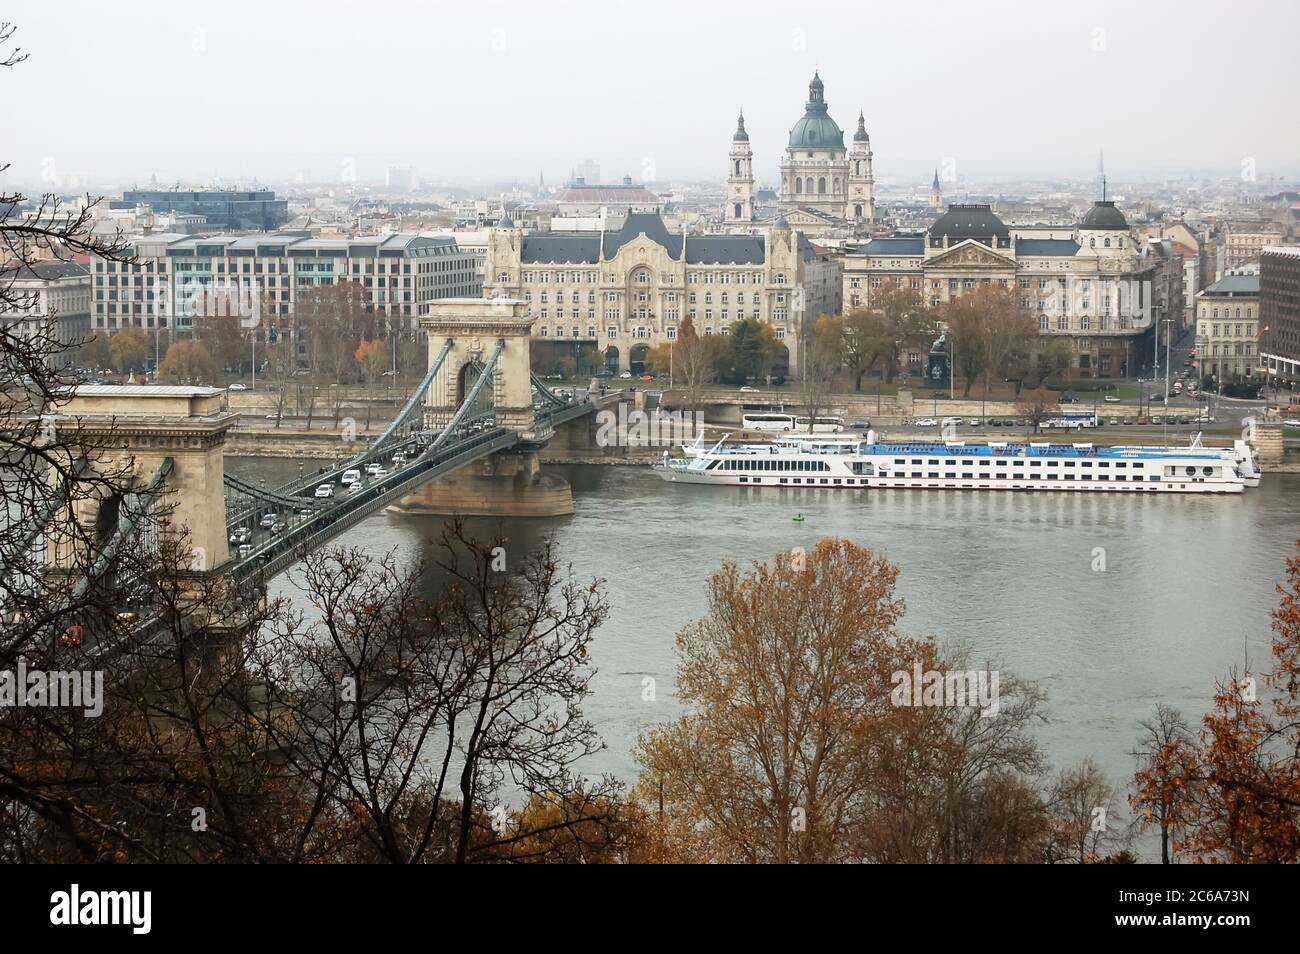 View of the Chain Bridge and Danube river in Budapest, Hungary. Stock Photo